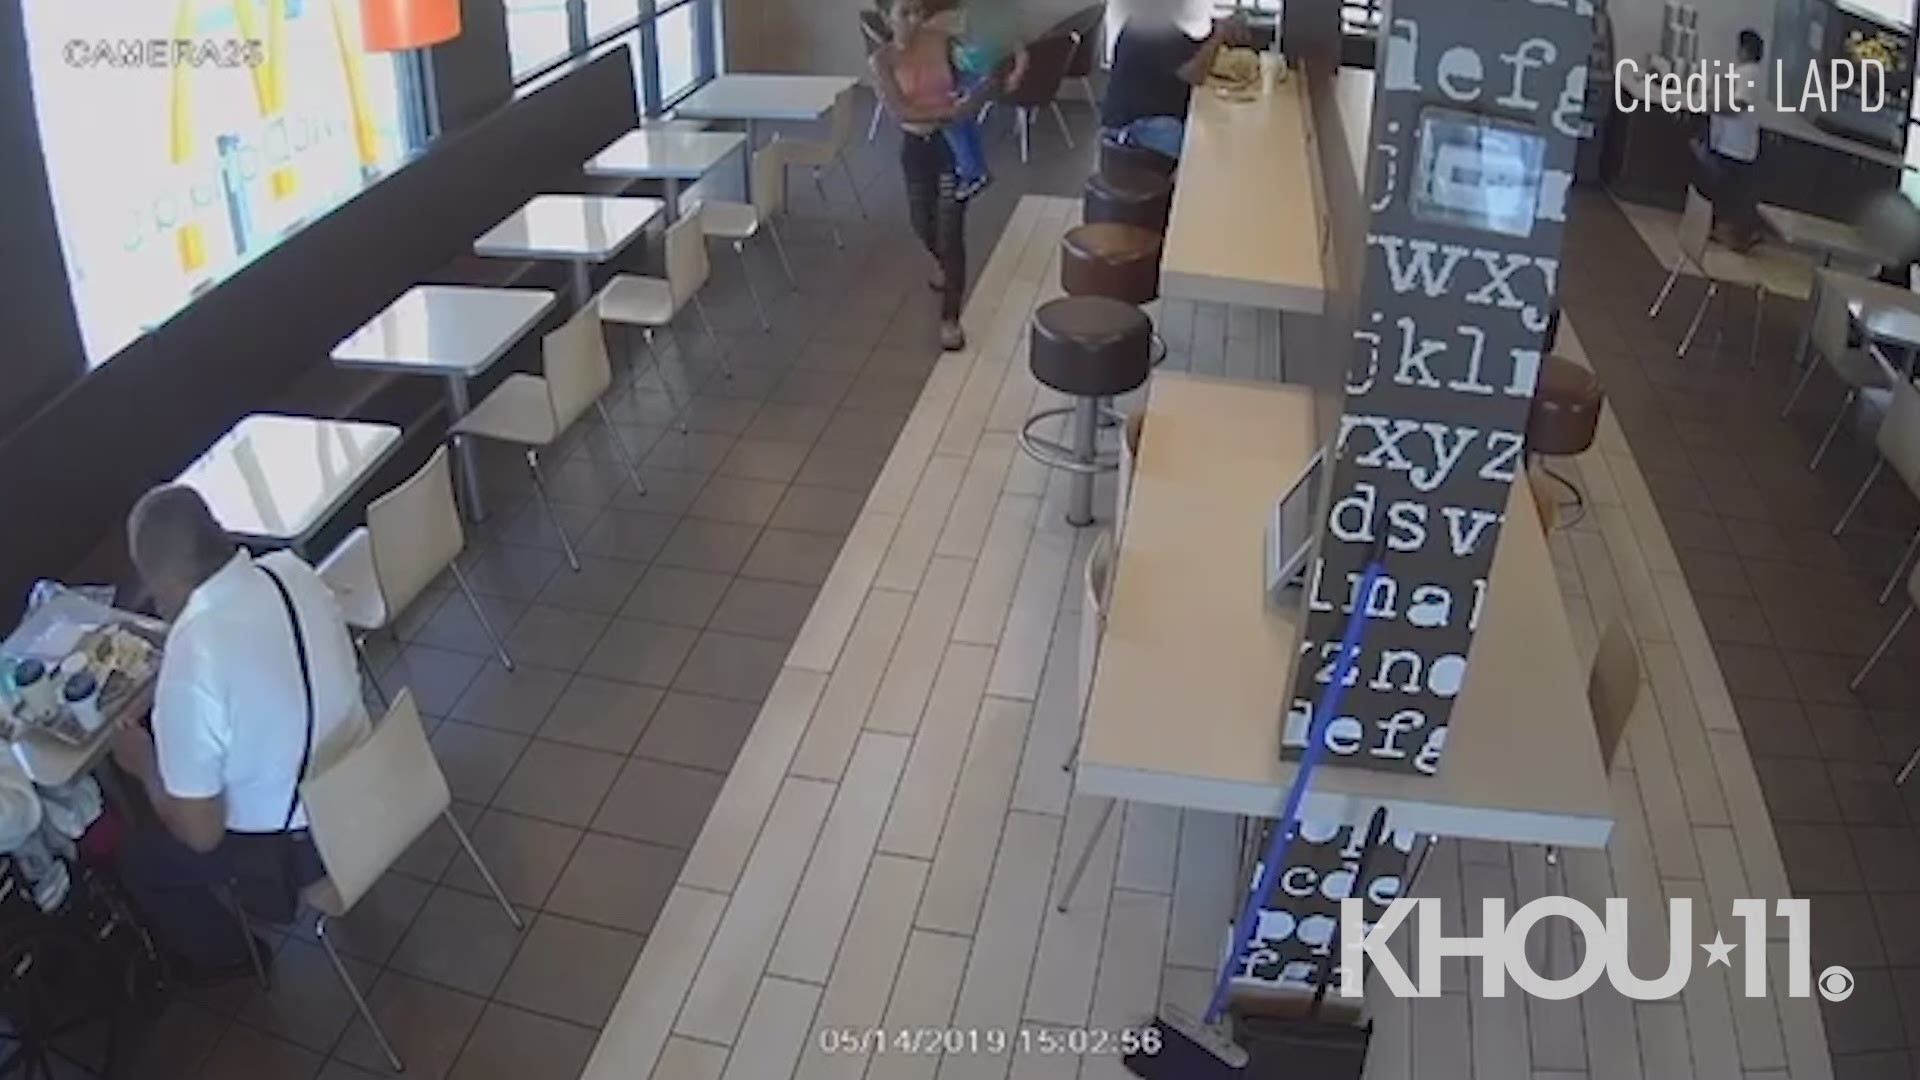 Police in Los Angeles are looking for this woman who allegedly tried to take children from two different McDonald's restaurants on May 14 and May 15, 2019. The suspect is described as a 25-30-years old, female Hispanic or Black, black hair, unknown
color eyes, standing at 5 foot 4 inches tall, and weighing approximately 115 pounds.